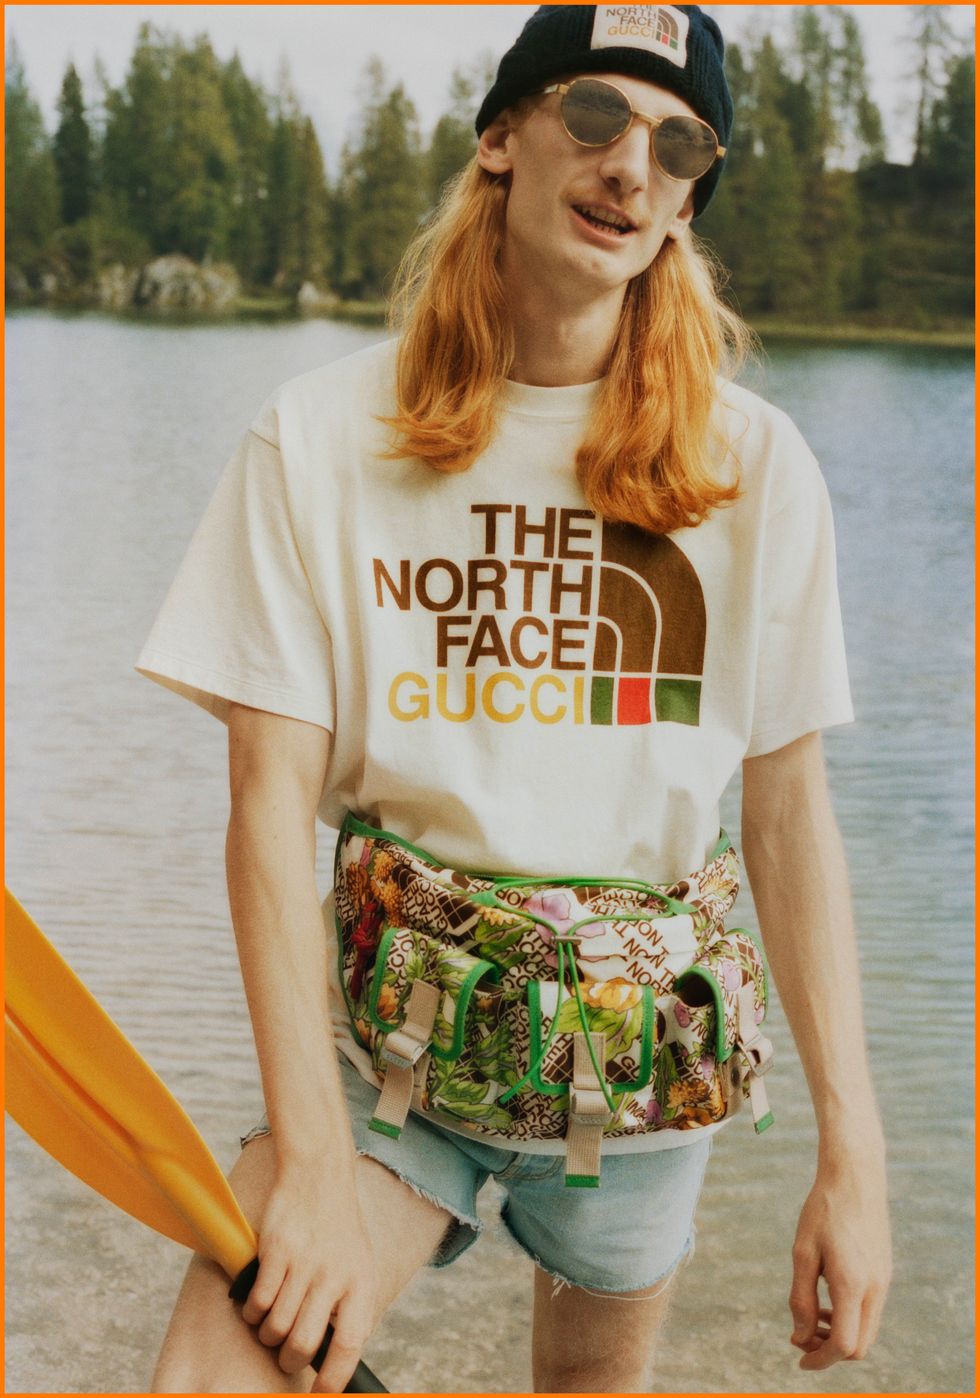 Gucci x The North Face Sweatshirt Forest Print